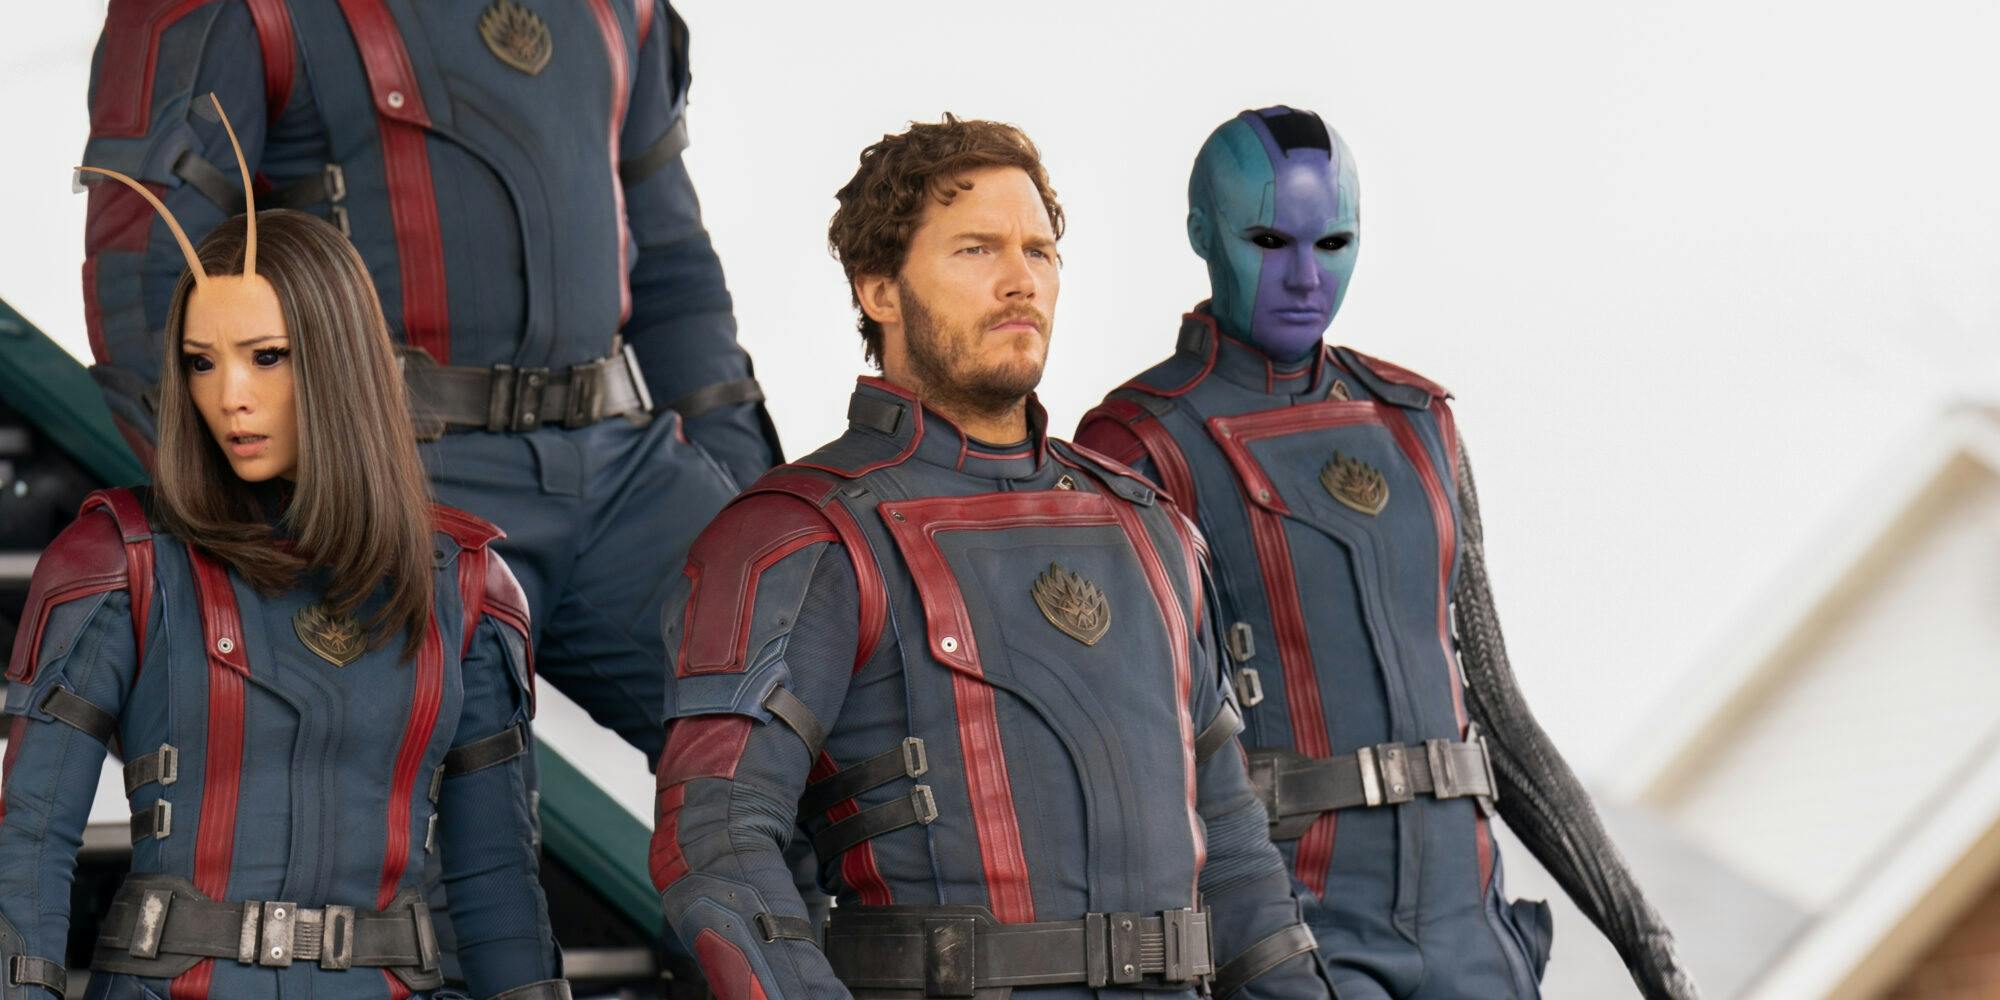 Marvel Theory: Where will Star-Lord Show Up Next?